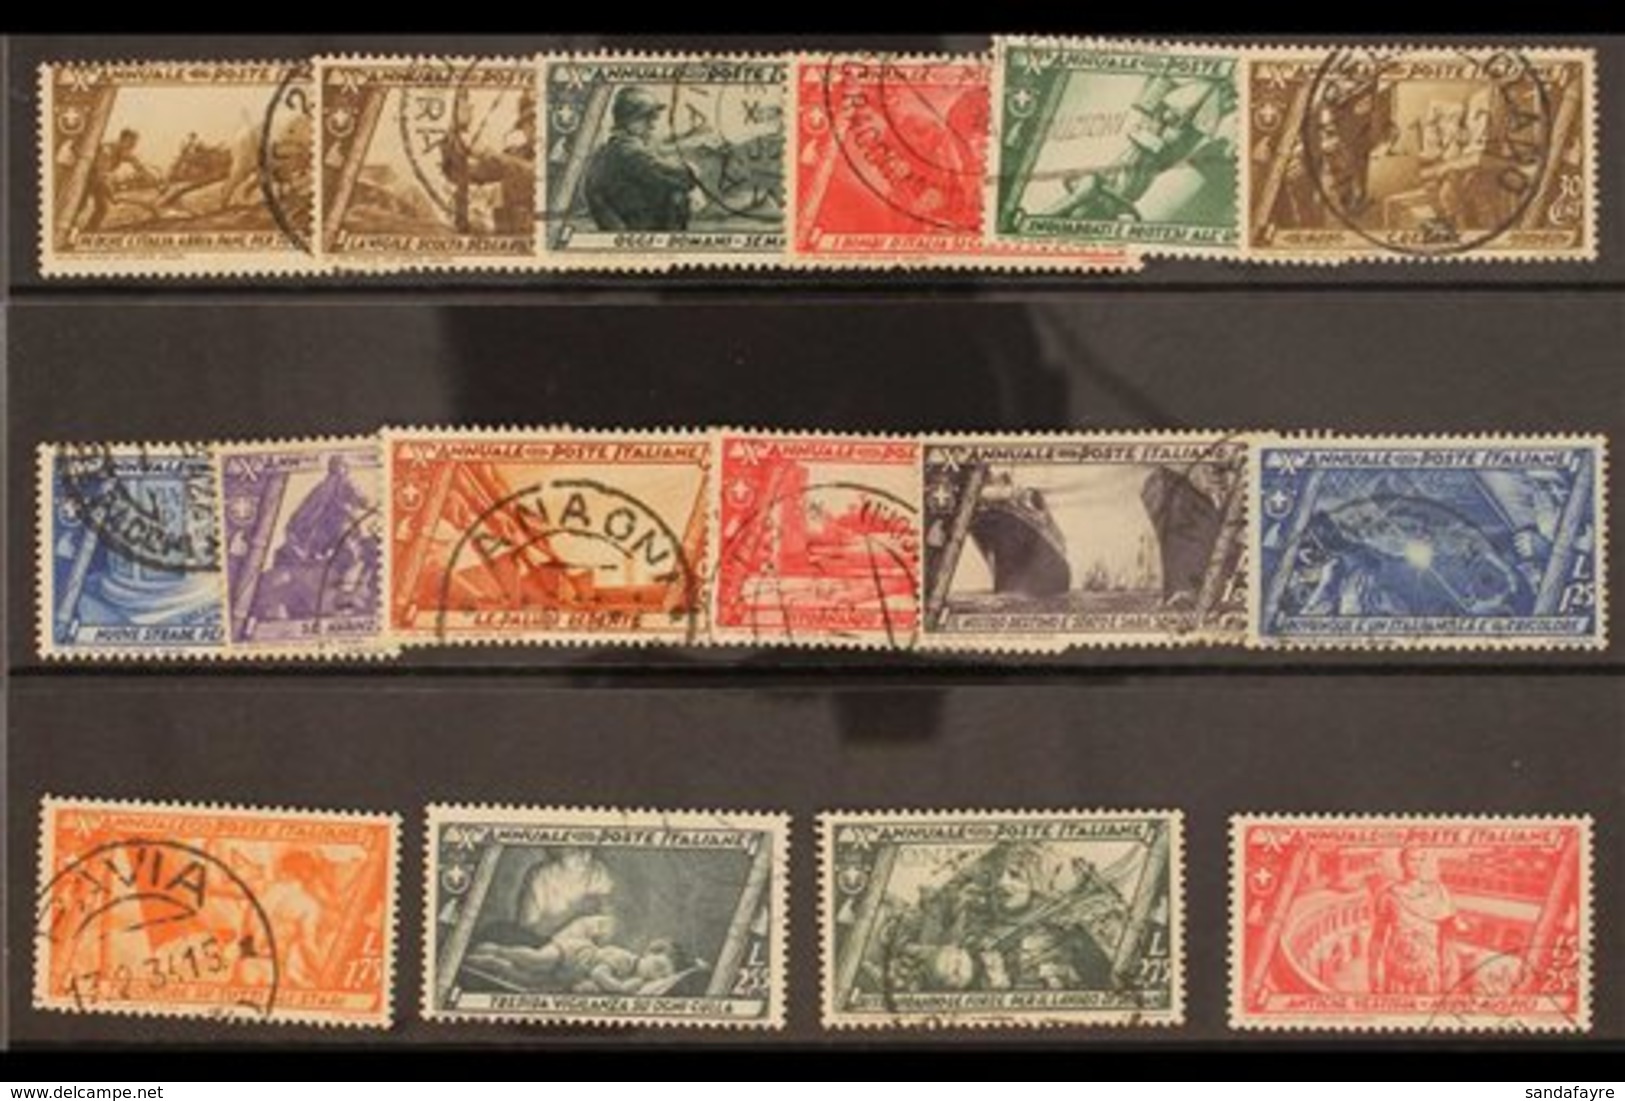 1932 Fascist March On Rome (Postage) Complete Set (Sass S. 65, SG 350/65) Used. (16 Stamps) For More Images, Please Visi - Unclassified